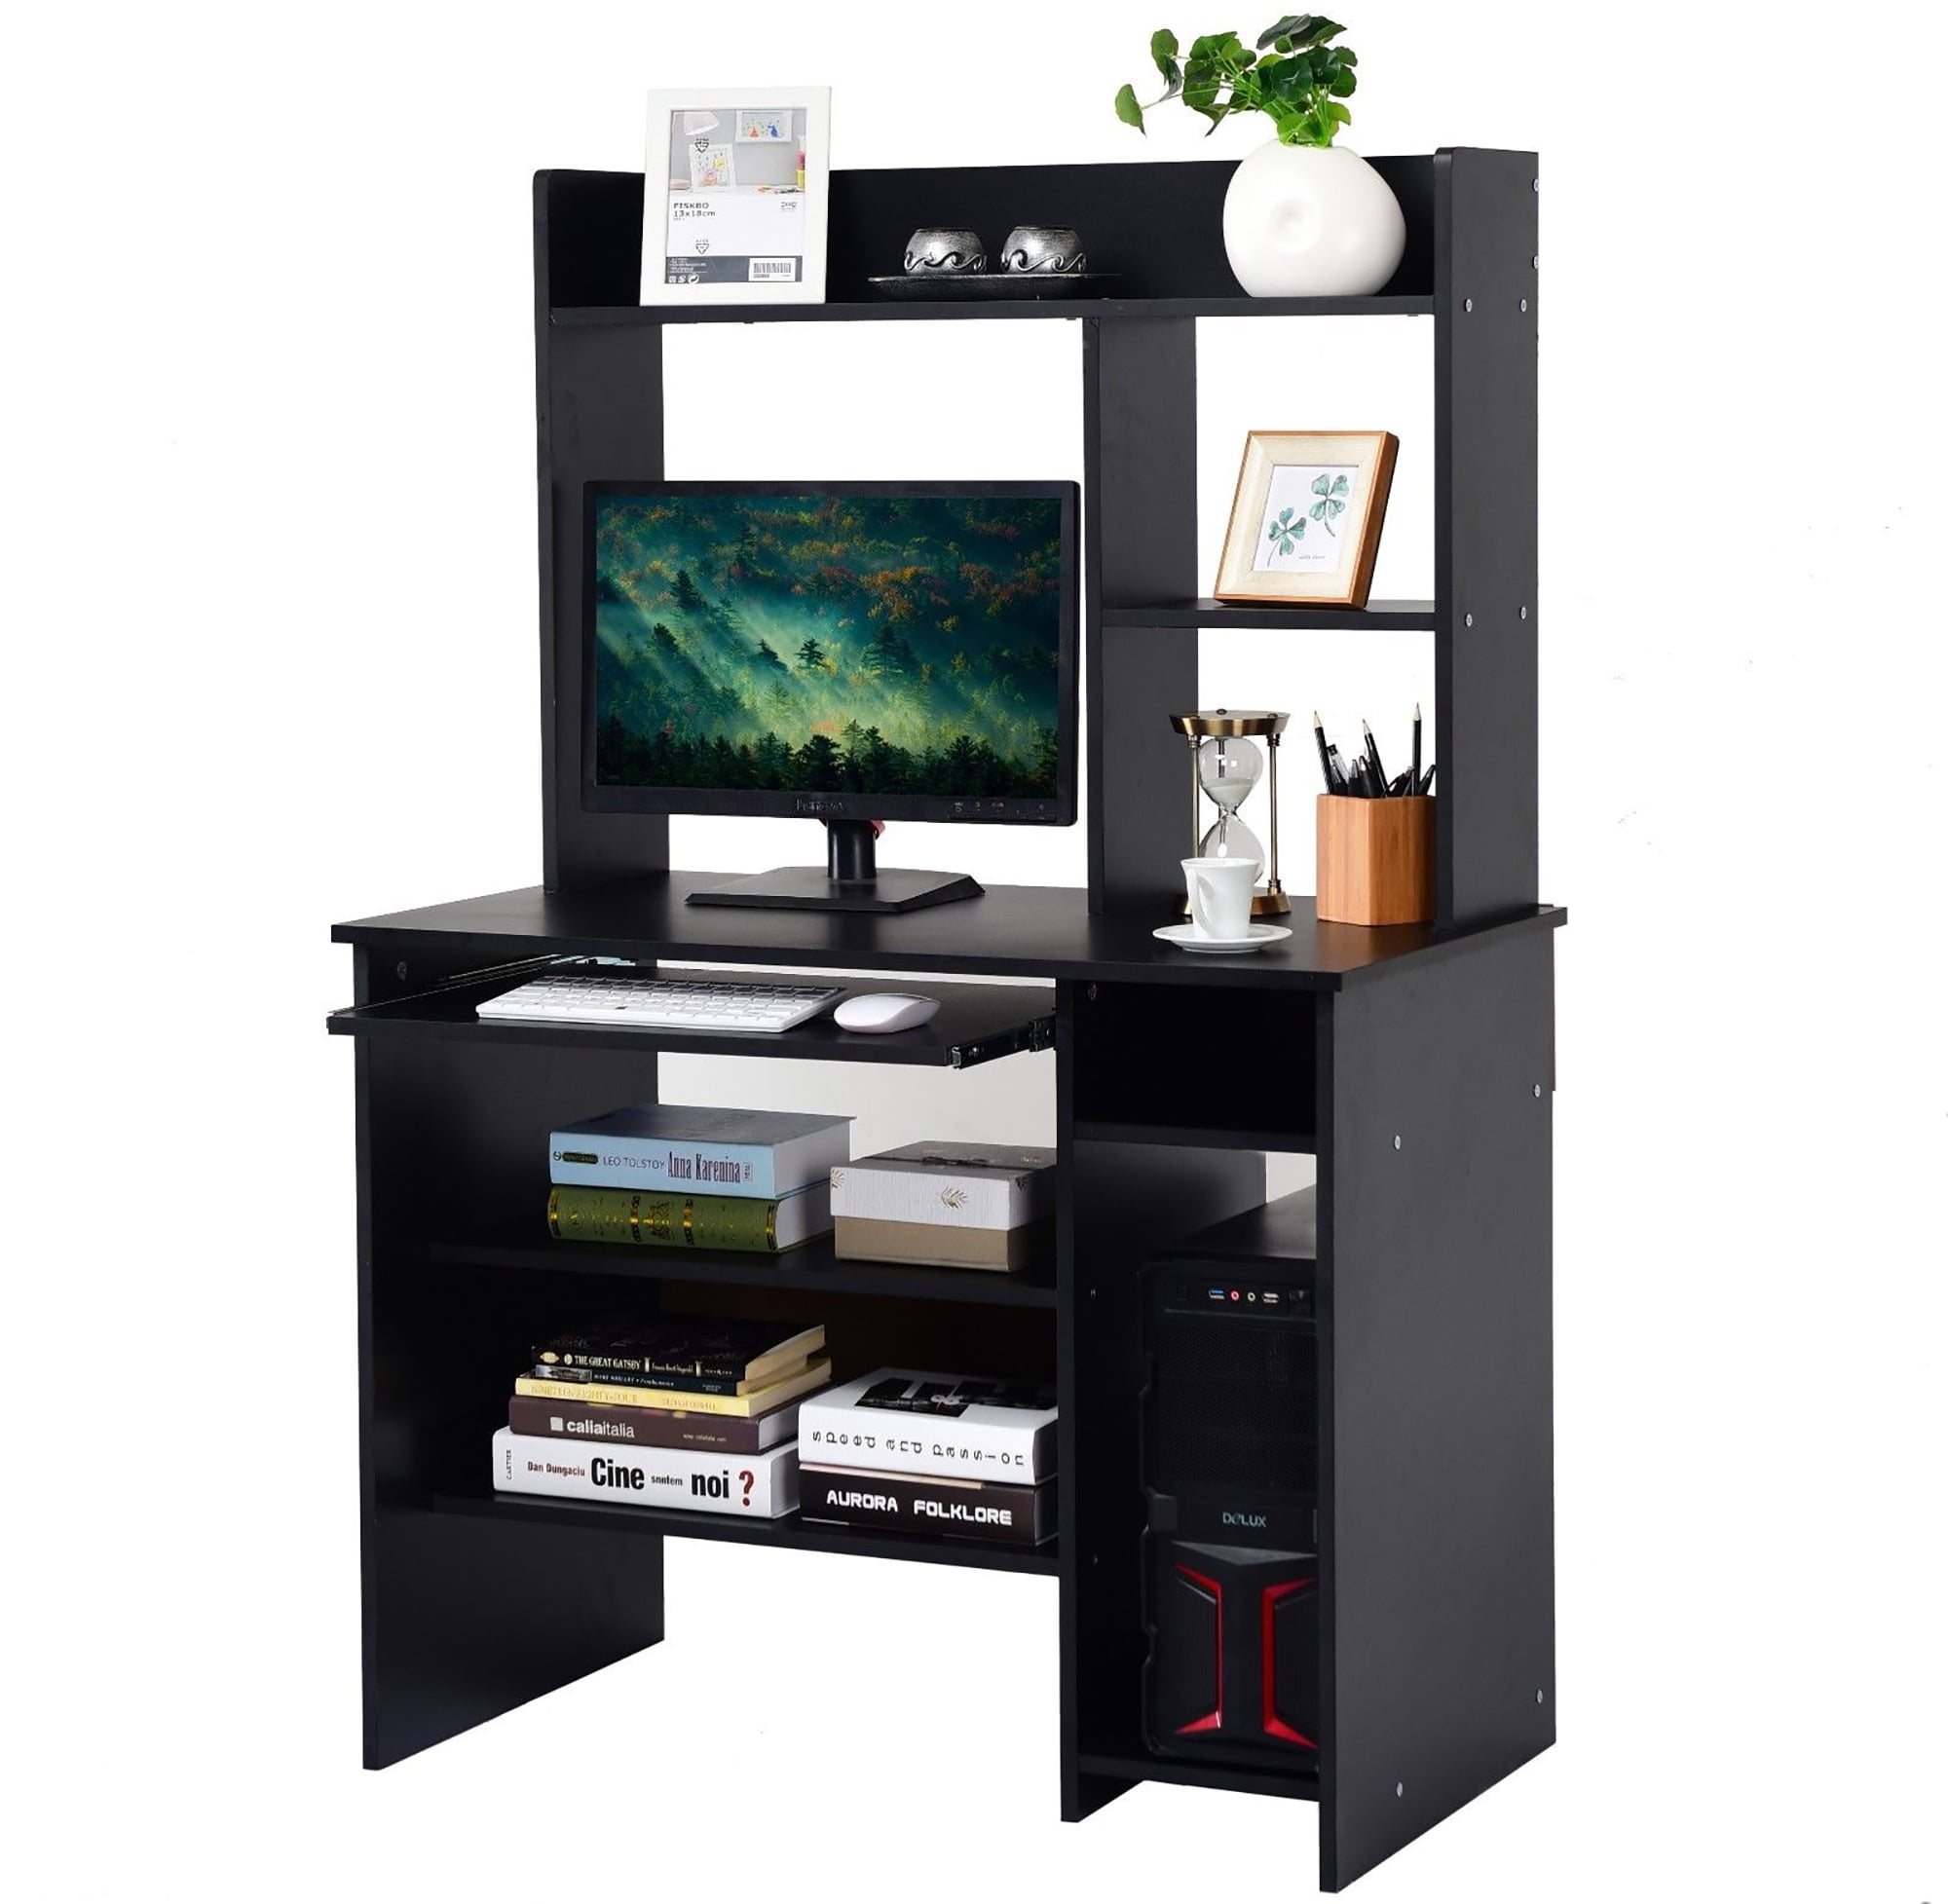 Emall Life Computer Desk with Bookshelf and Drawers PC Laptop Study Table 